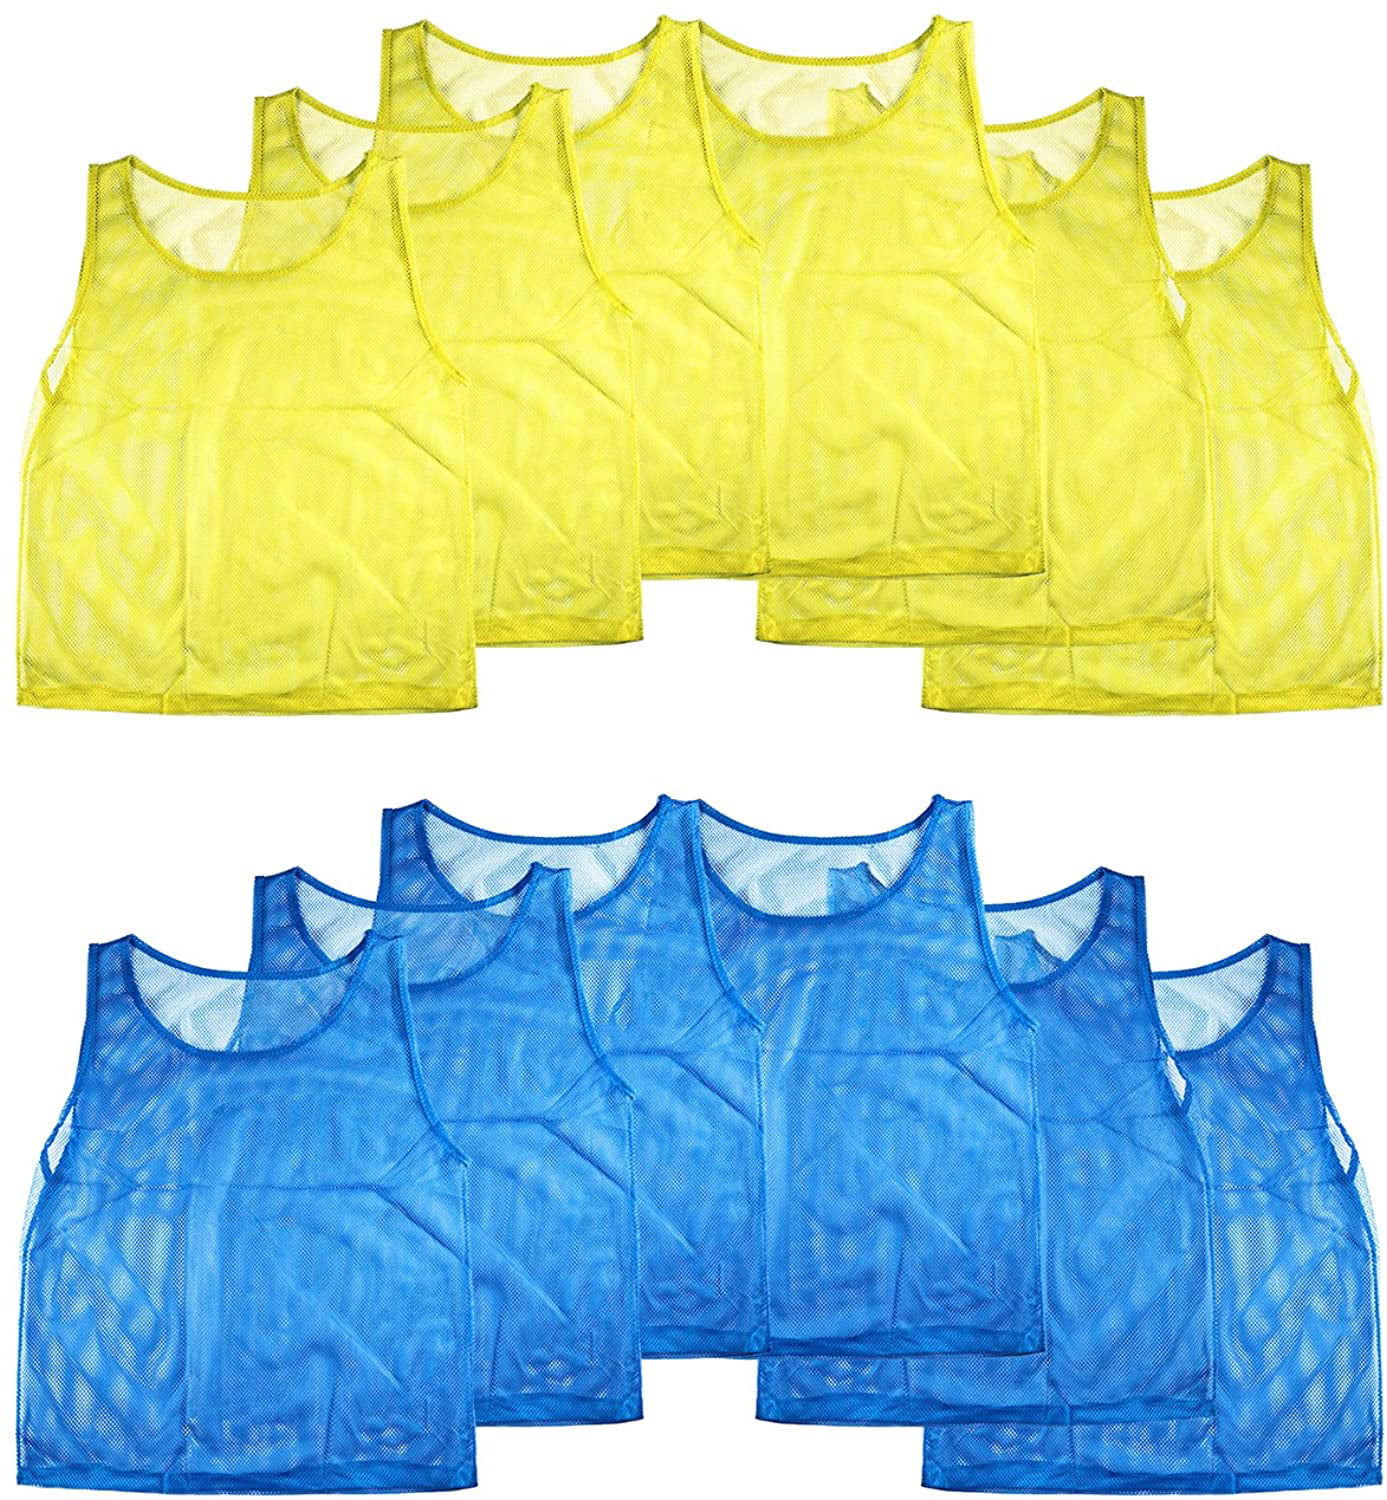 12 Nylon Mesh Scrimmage Team Practice Vests Pinnies Jerseys for Children Youth 